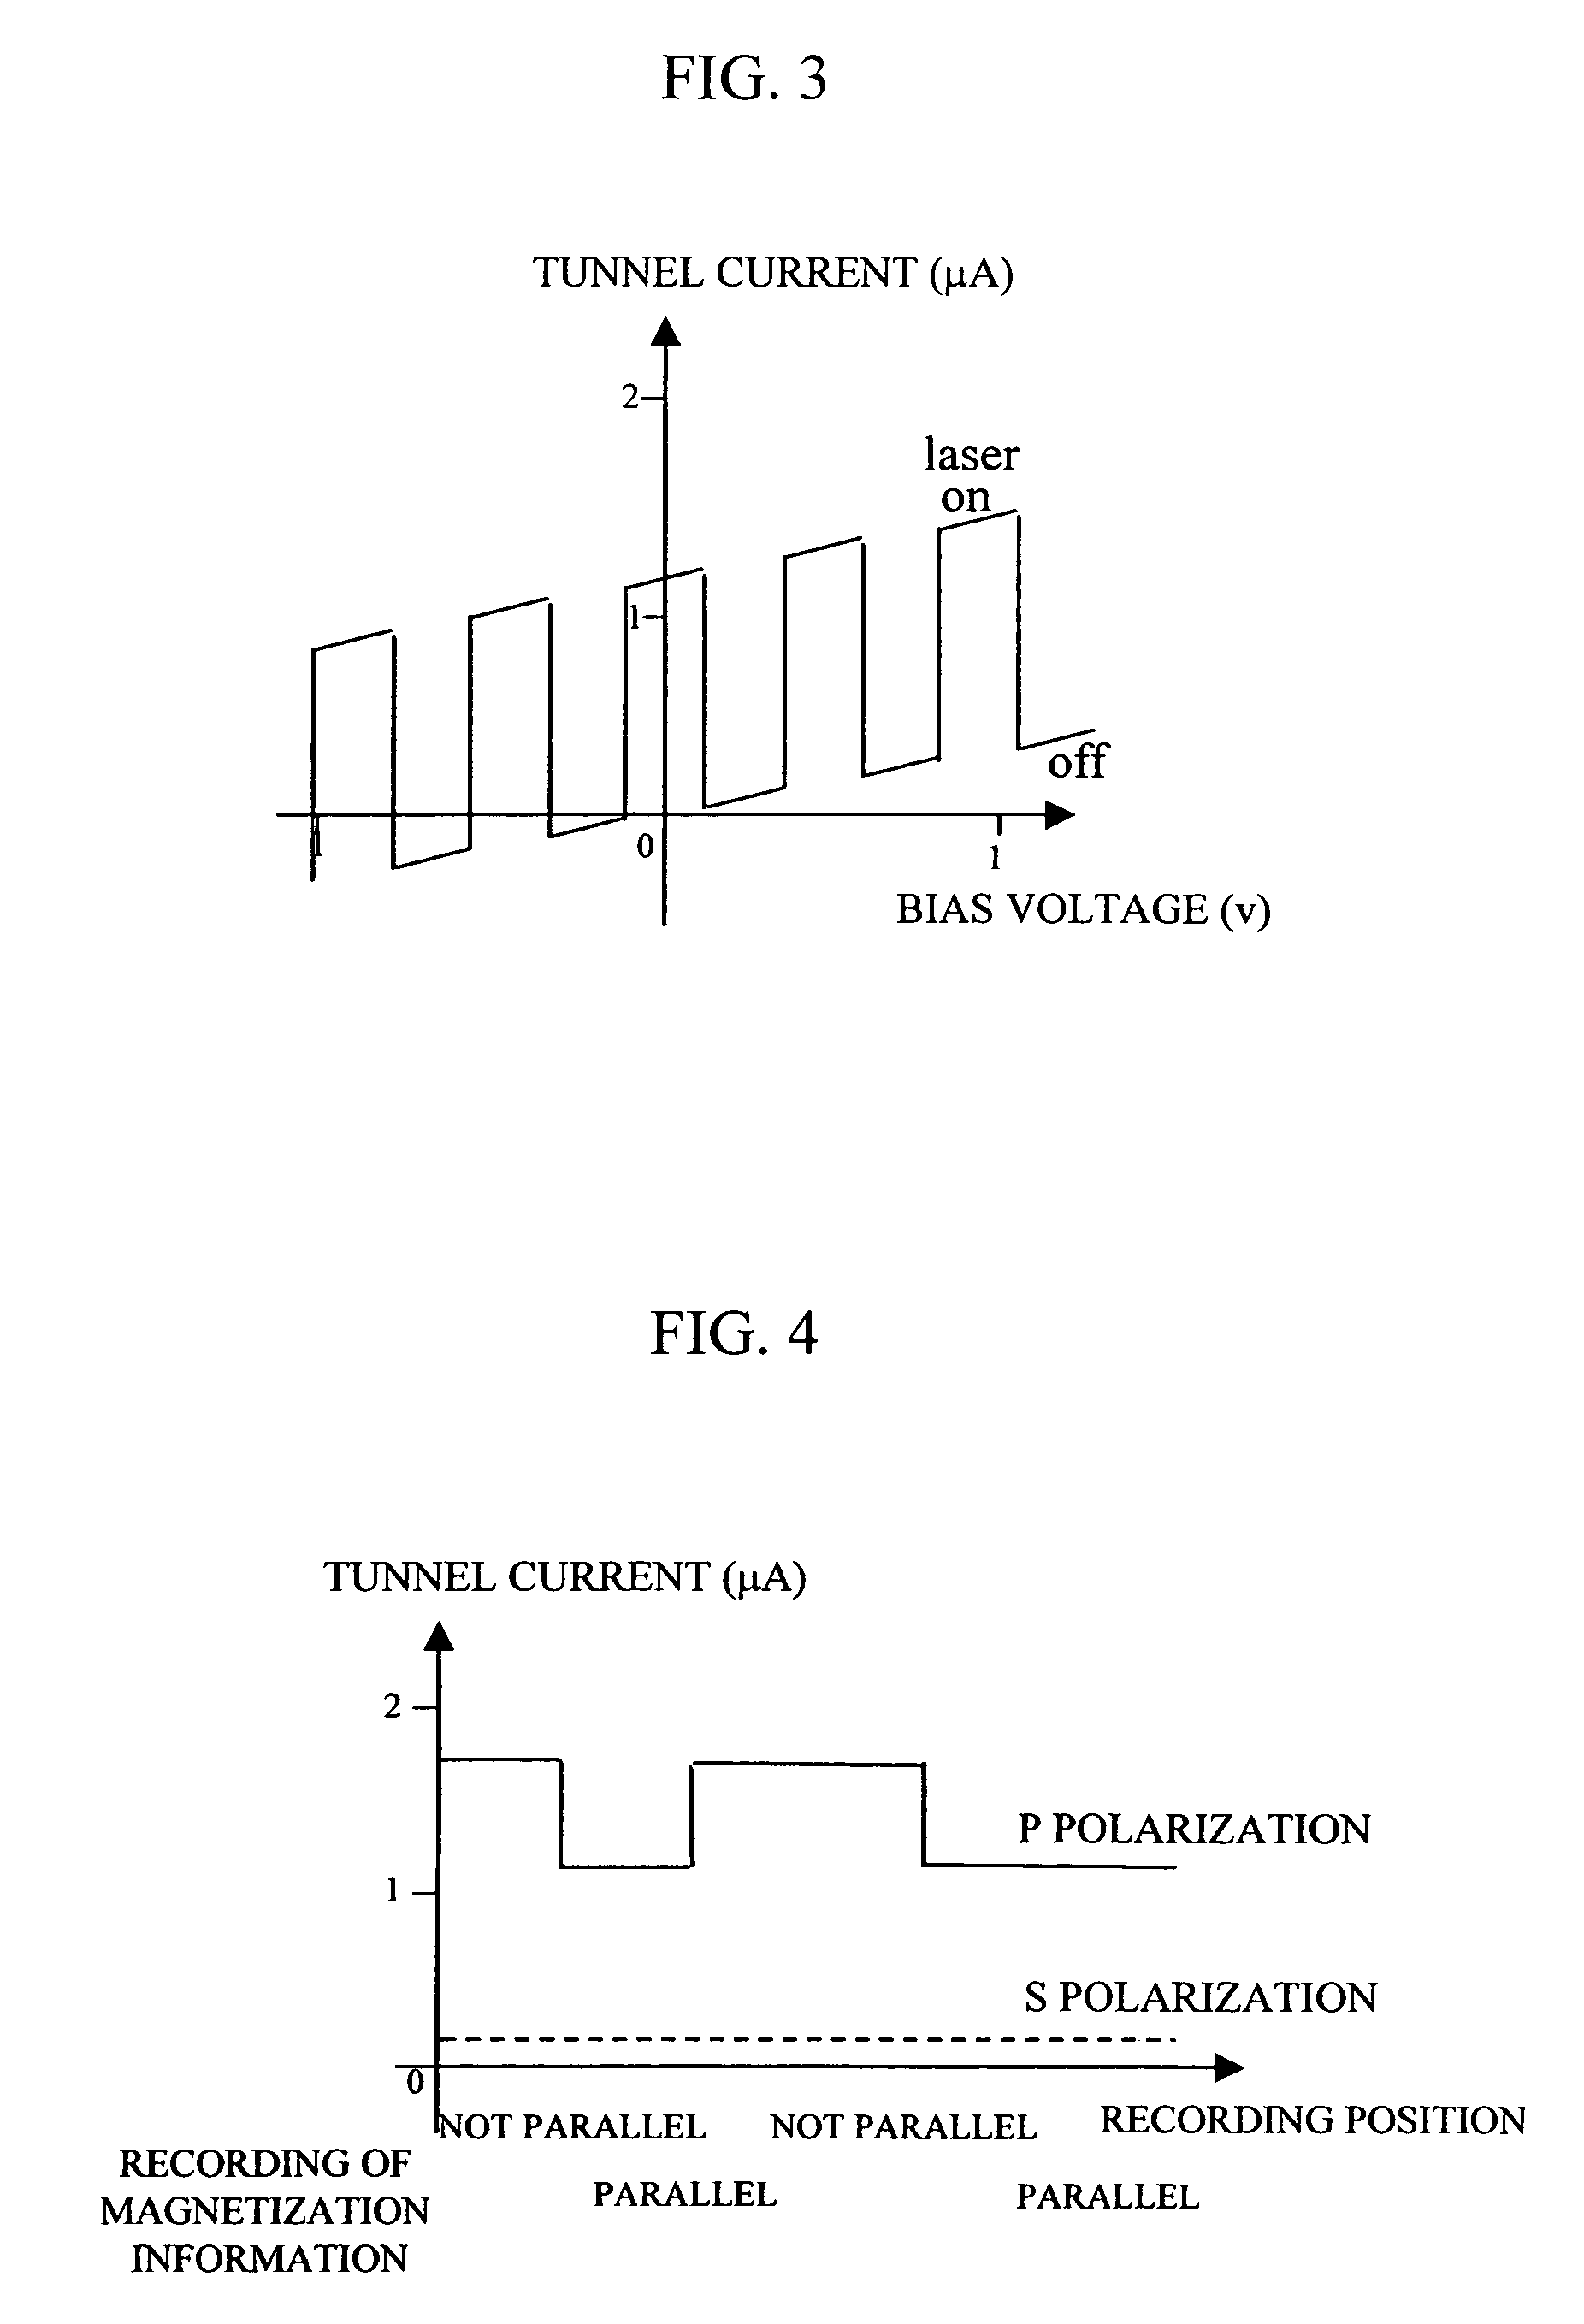 Method and apparatus for recording/reproducing magnetization information